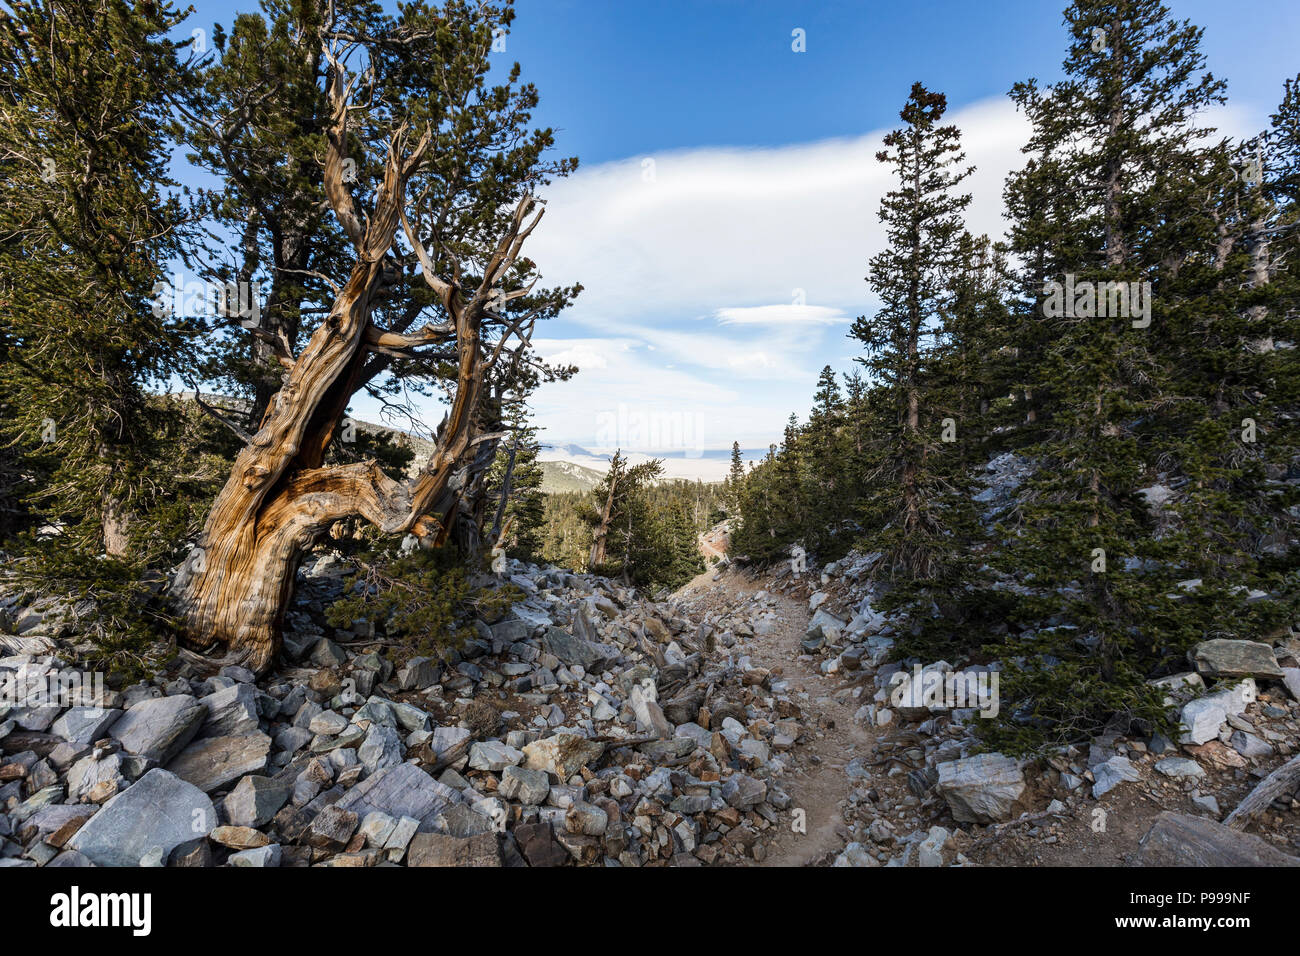 Bristlecone Pines trail in Great Basin National Park in Northern Nevada.  Bristlecone Pines are the oldest trees in the world. Stock Photo